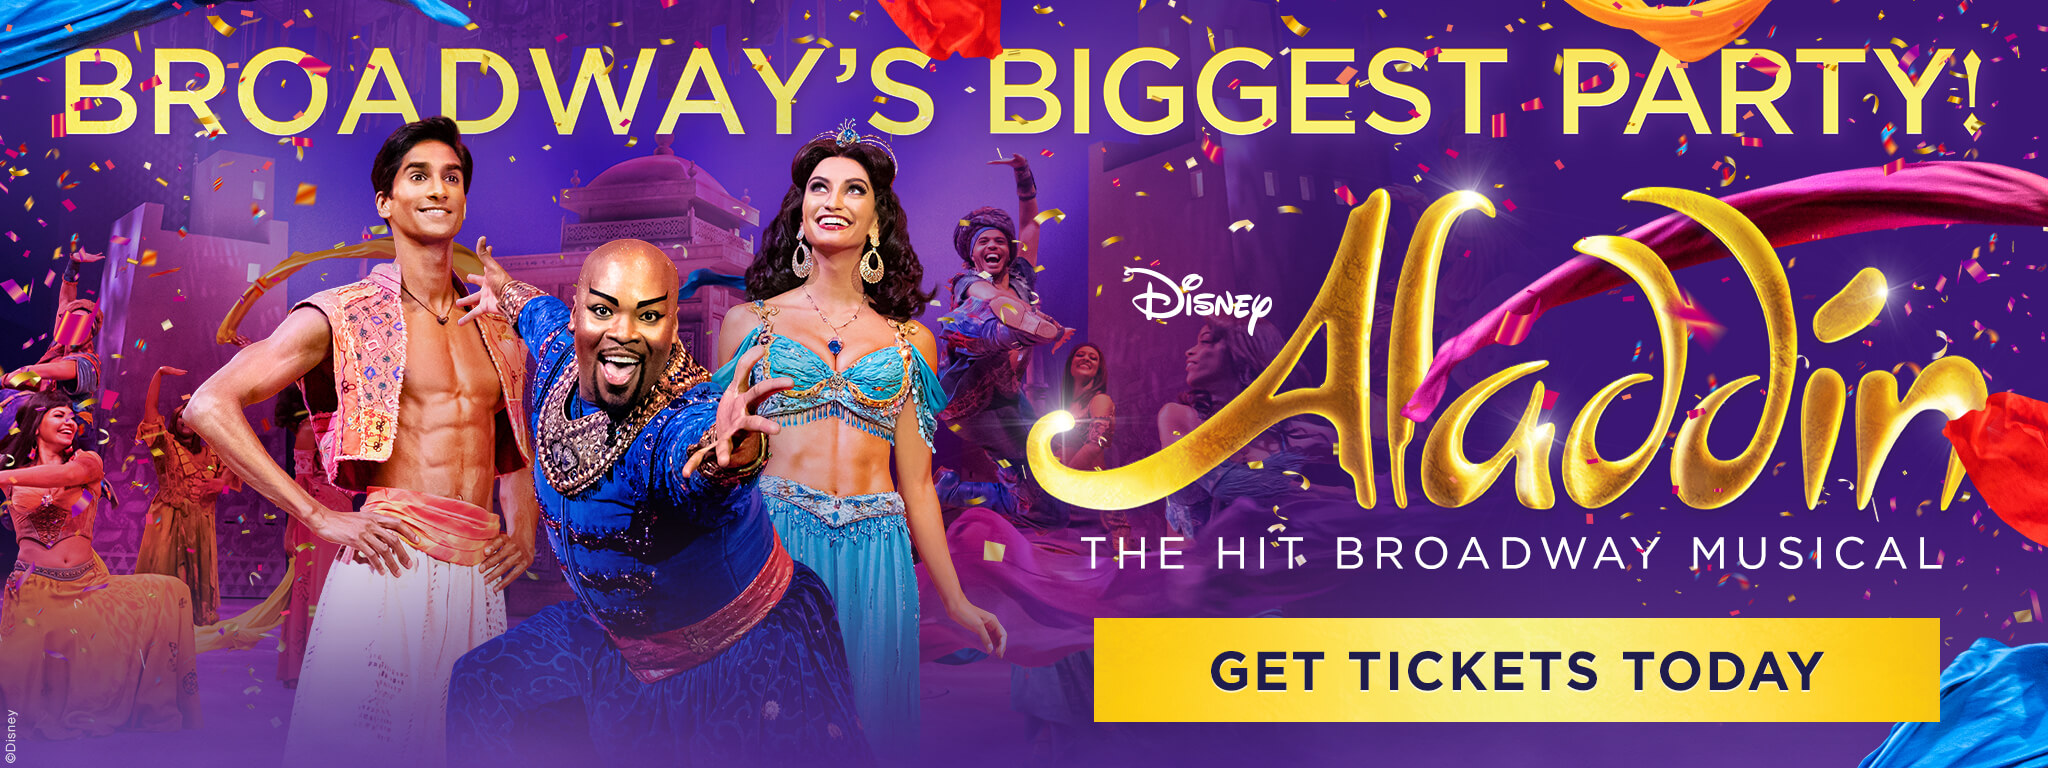 Disney ALADDIN - Broadway's Biggest Party! - GET TICKETS TODAY